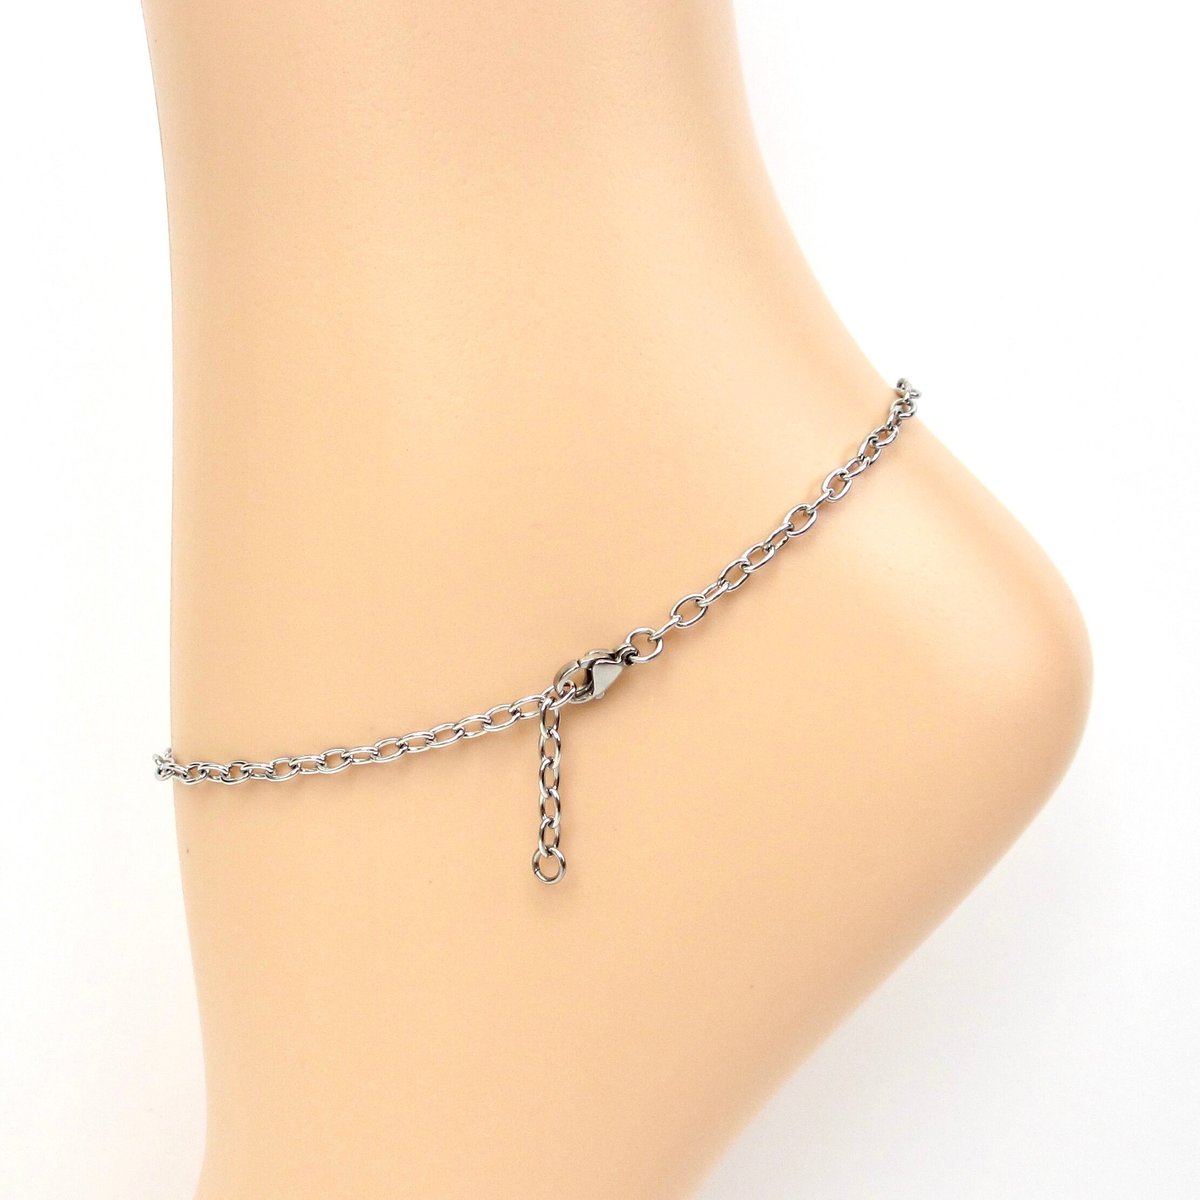 Transgender pride anklet, chainmail barrel weave, subtle trans flag jewelry gifts, anodized aluminum and stainless steel